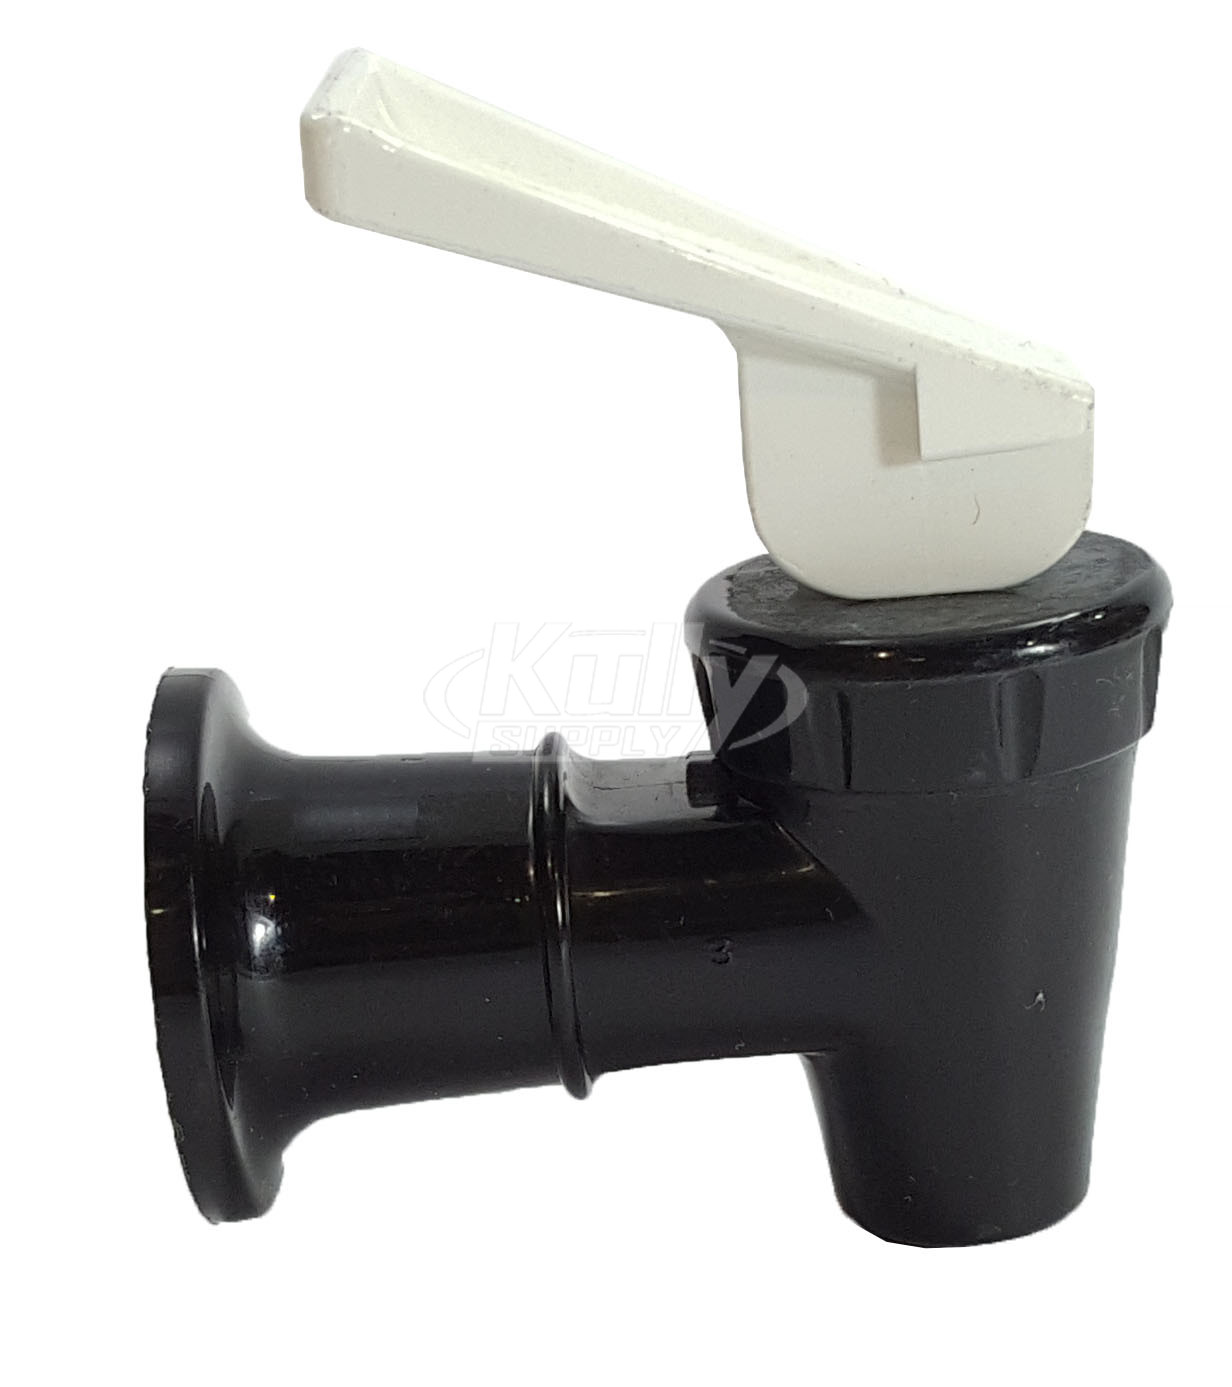 Oasis 032135-122 Faucet, Cook Blk/Whi